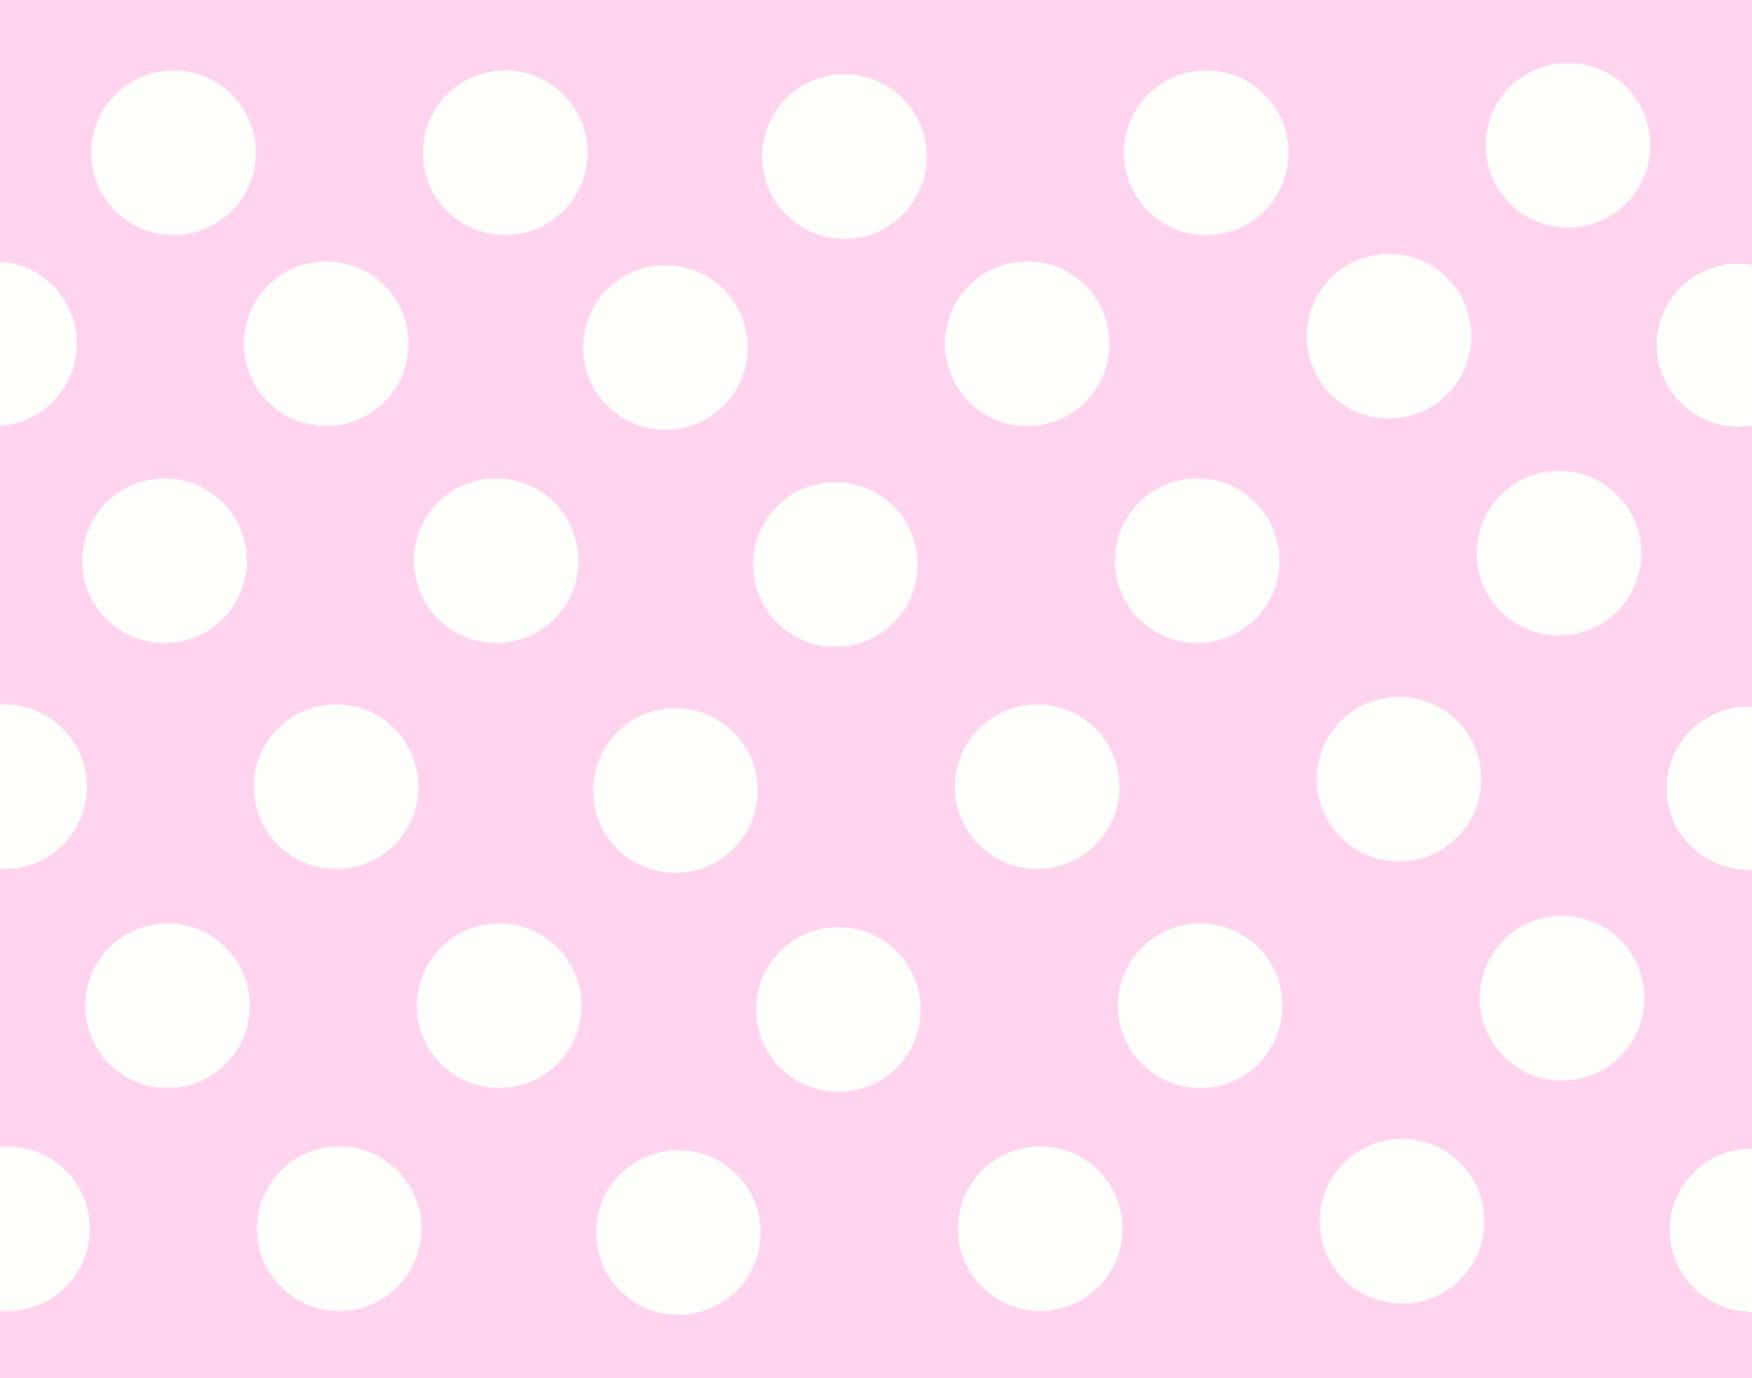 A Pink And White Polka Dot Pattern